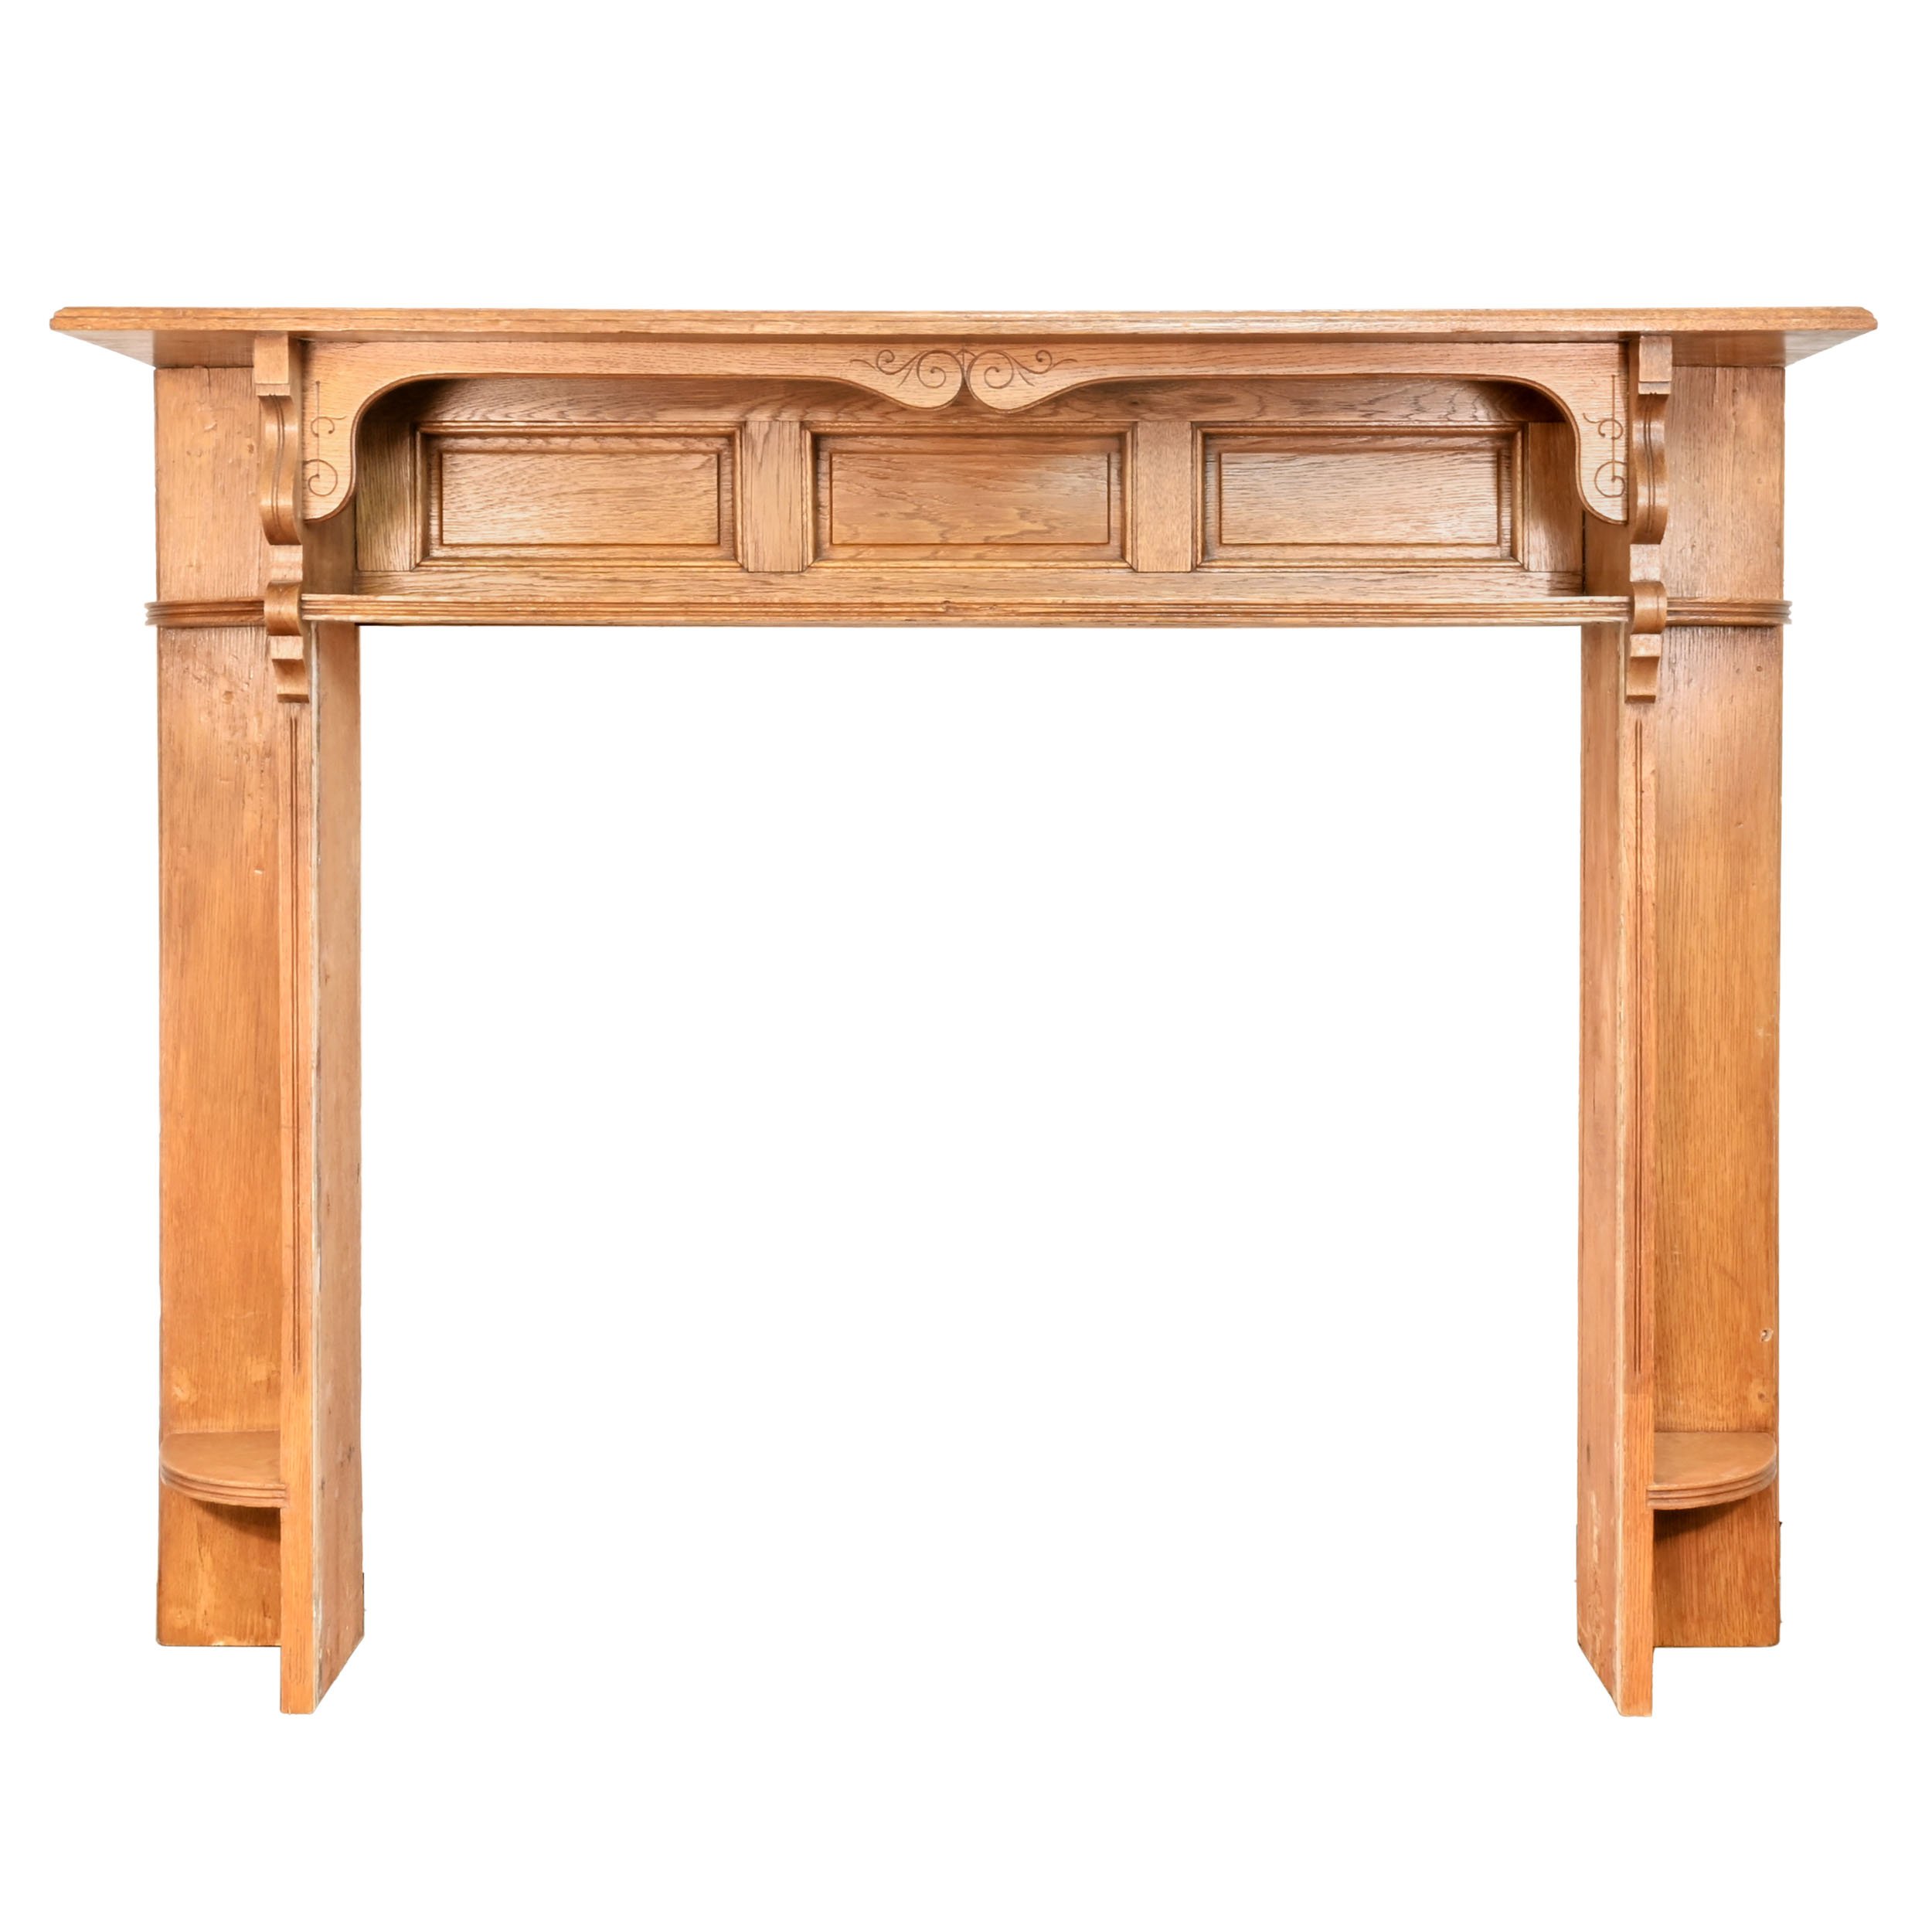 paneled oak mantel with shelves and hand carved scroll details